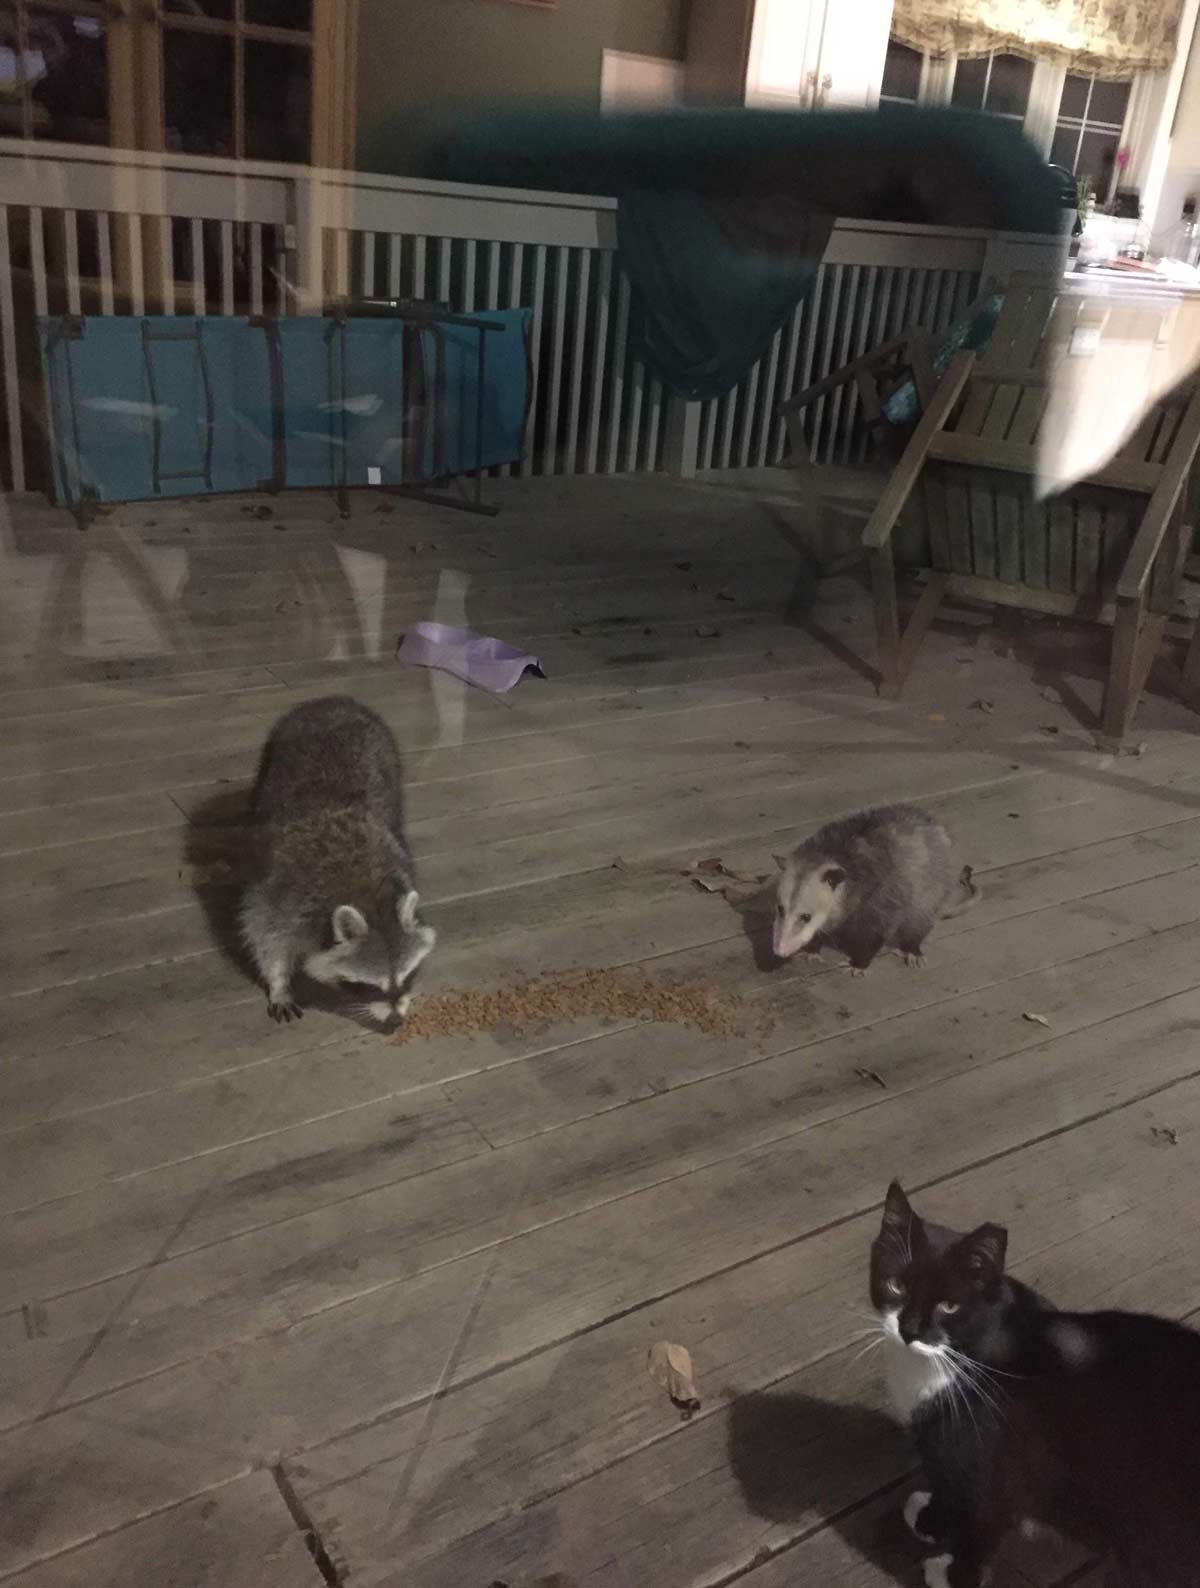 Unexpected visitors eating the cat food we put out for the strays